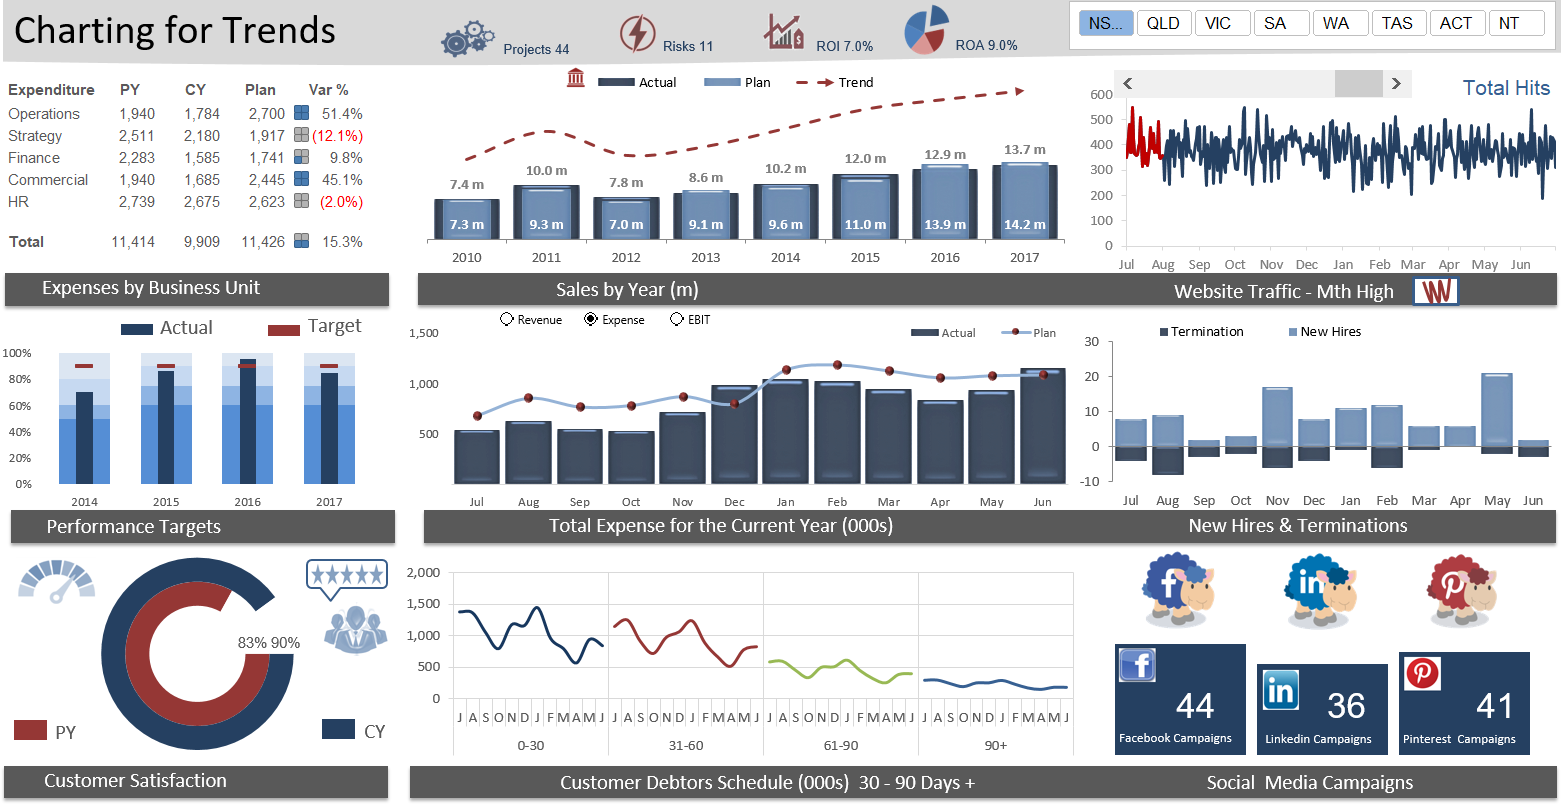 Excel dashboard image from https://www.thesmallman.com/excel-dashboard-course